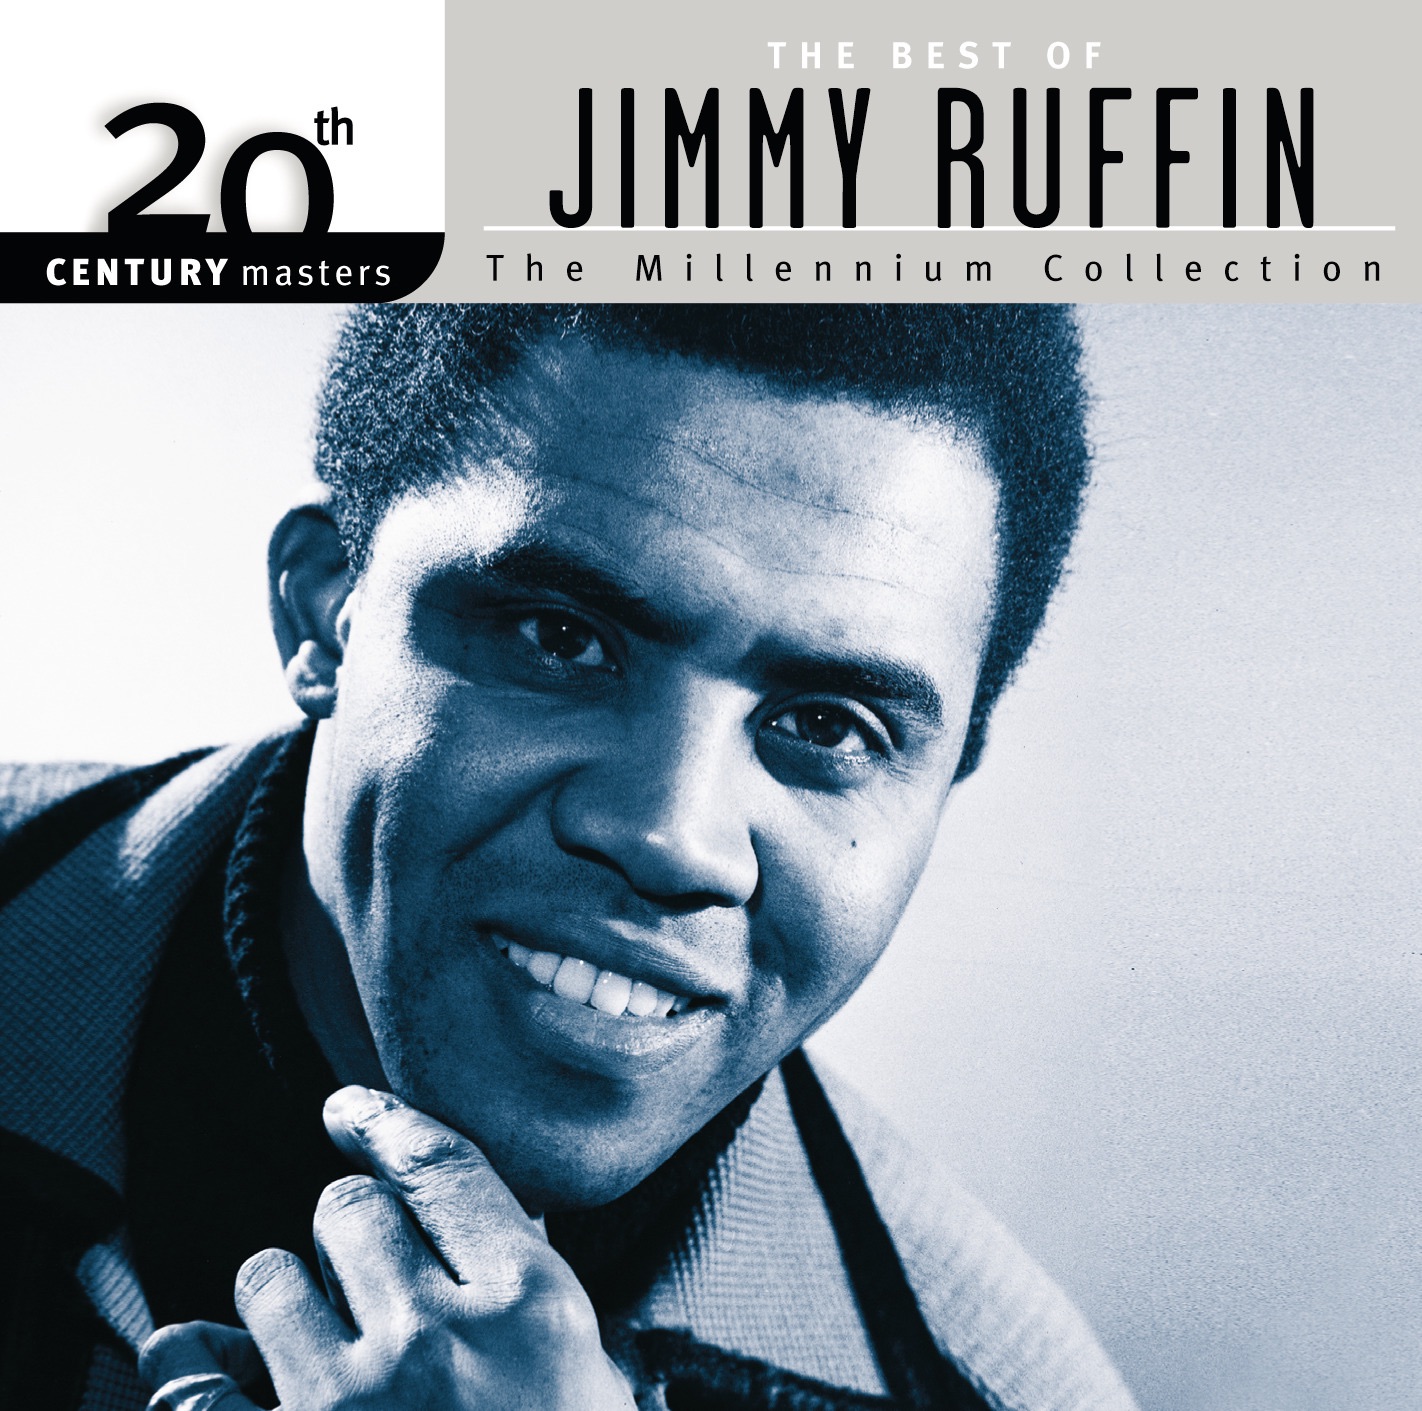 Art for I've Passed This Way Before by Jimmy Ruffin